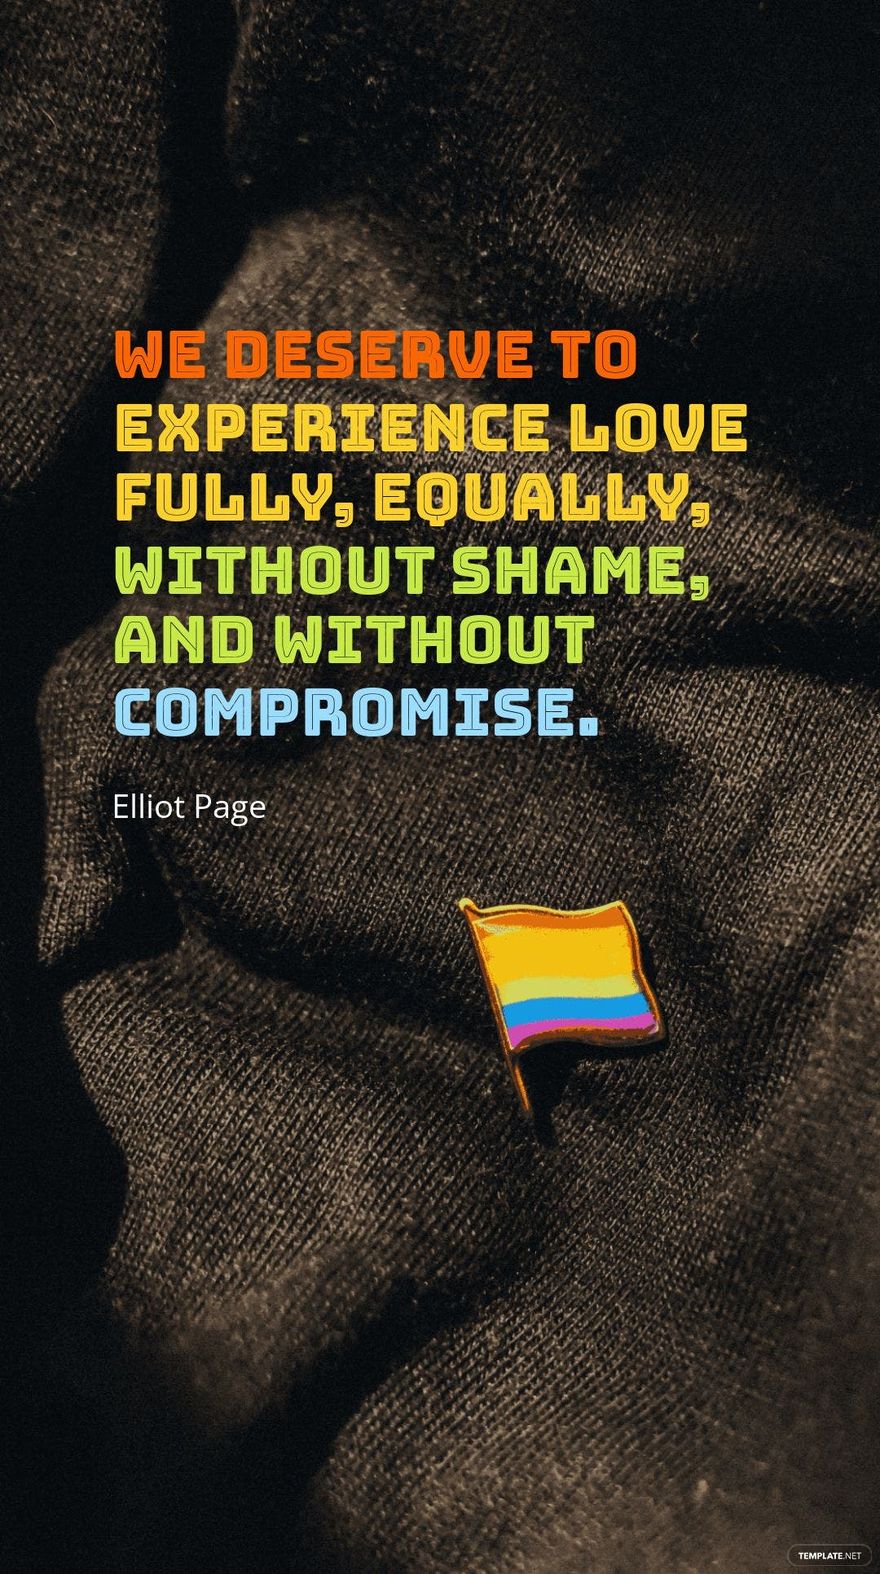 Elliot Page - We deserve to experience love fully, equally, without shame, and without compromise.